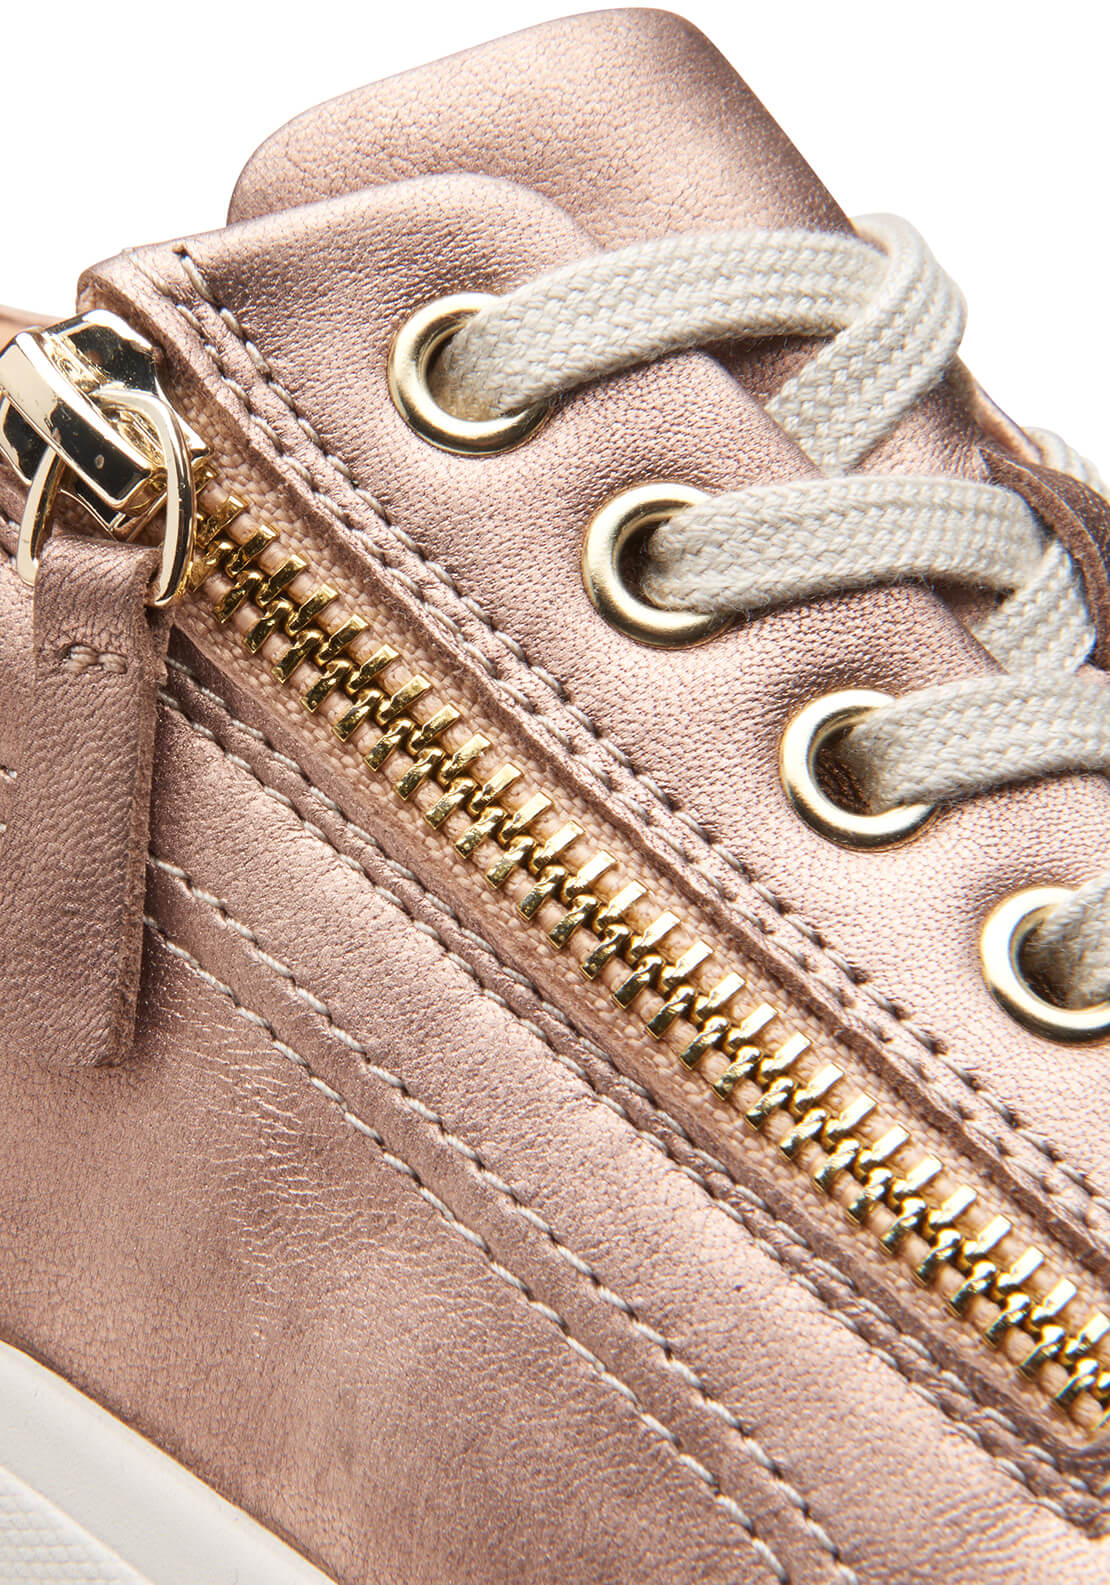 Clarks Nalle Lace Zip Trainer - Rose Gold 8 Shaws Department Stores